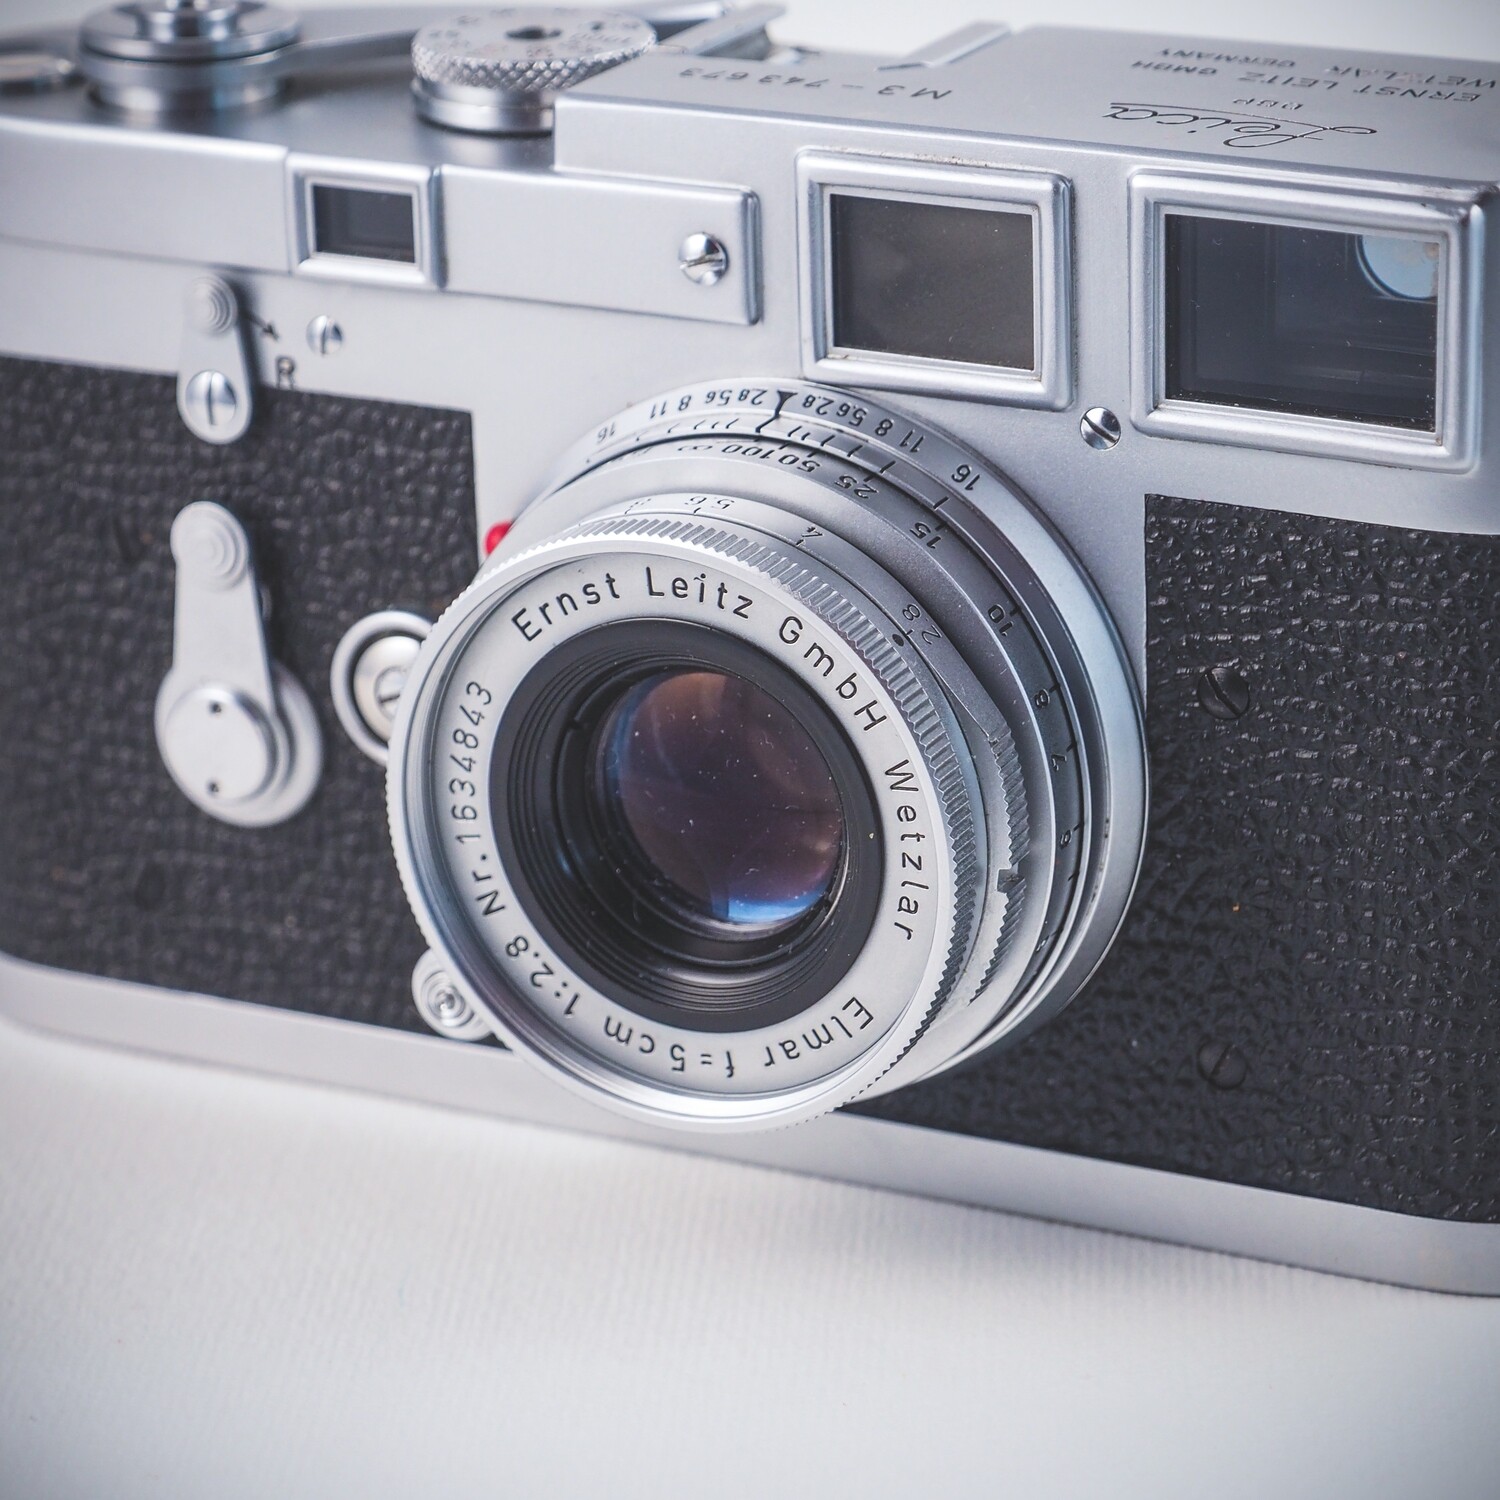 Leica M3 double stroke - body only